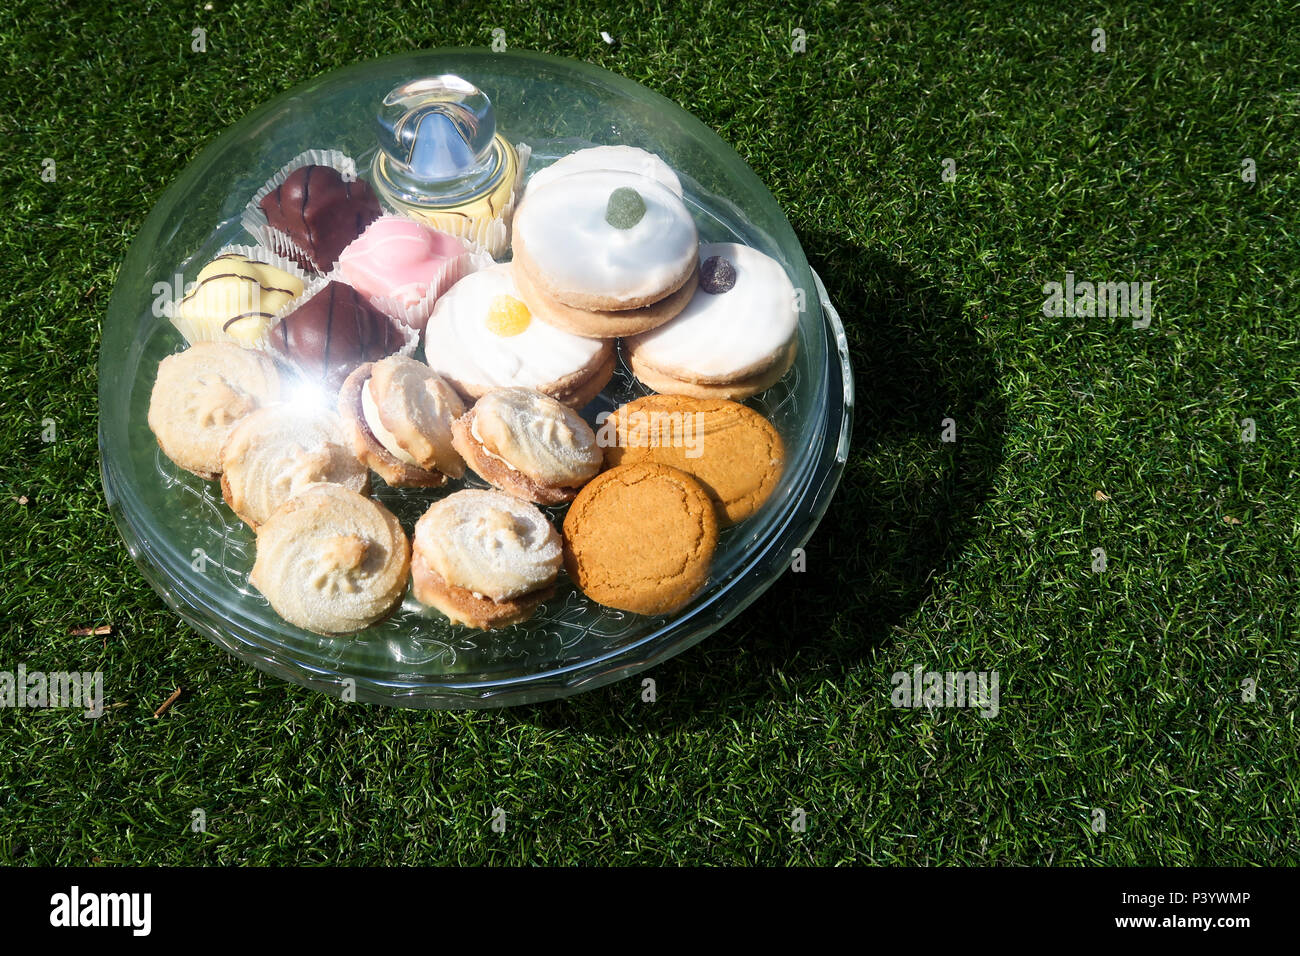 Selection of cakes under glass dome Stock Photo